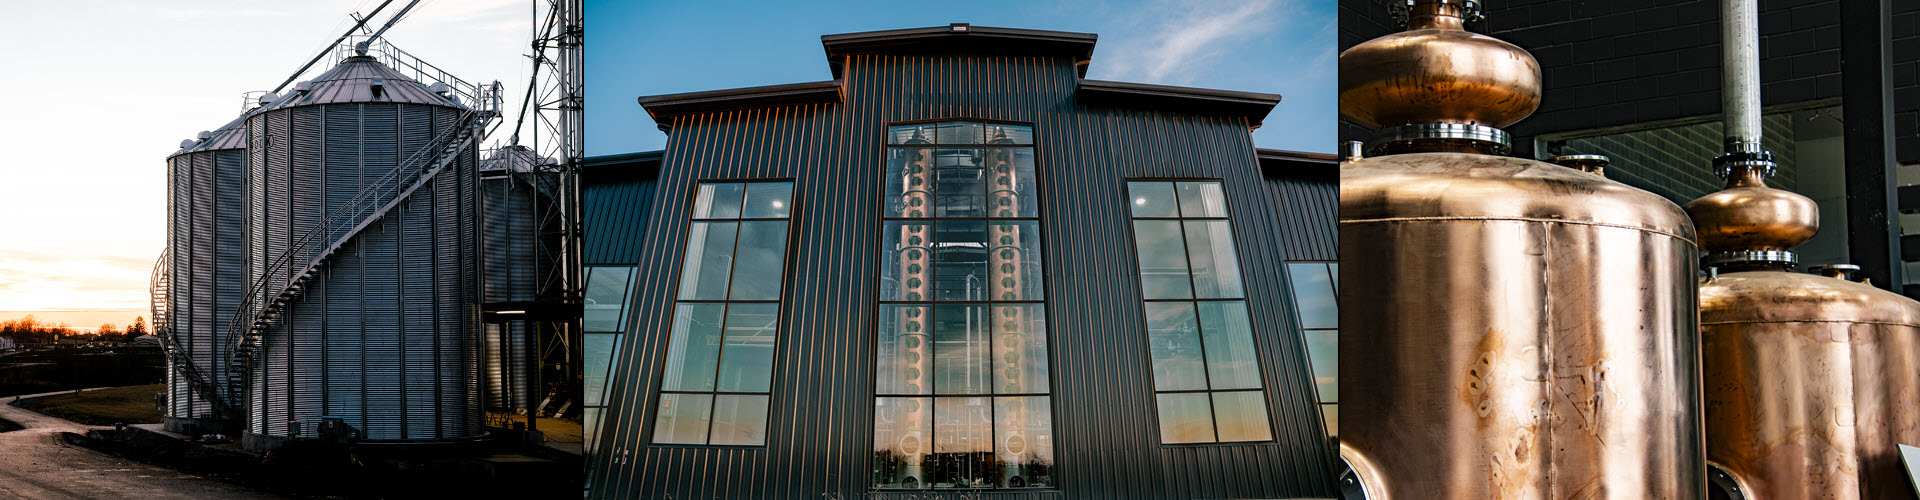 Garrard County Distilling Co - The New $250 Million Distillery is Now Operational